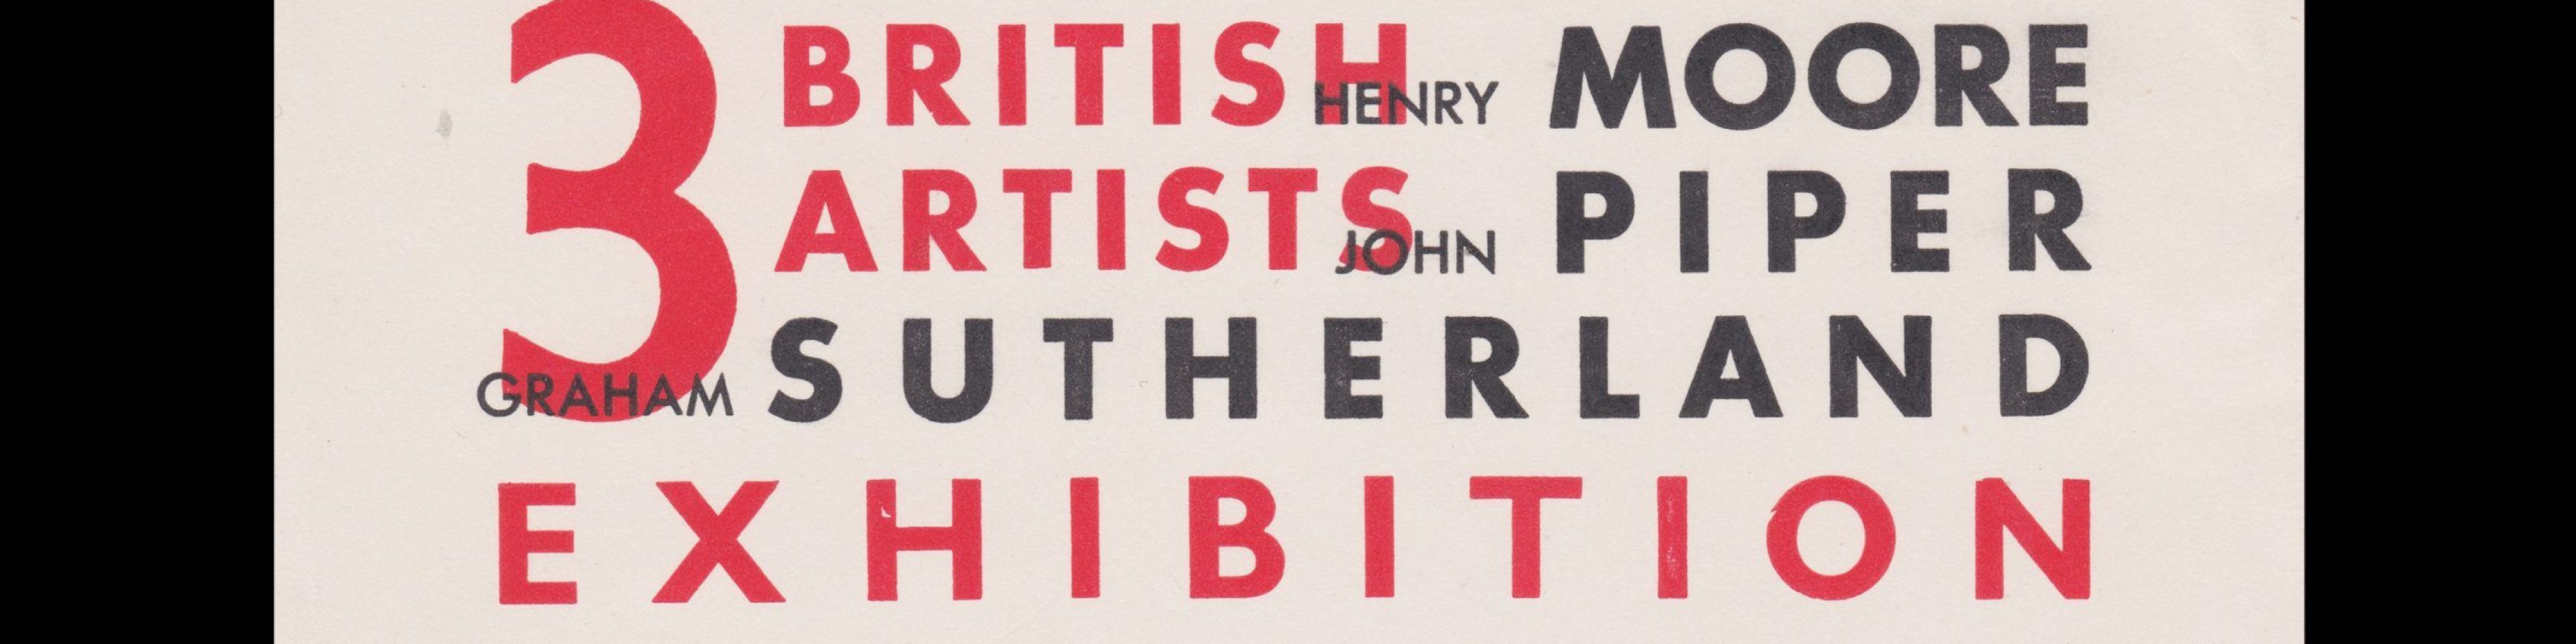 3 British Artists Exhibition, Leicester Museum and Art Gallery, 1941